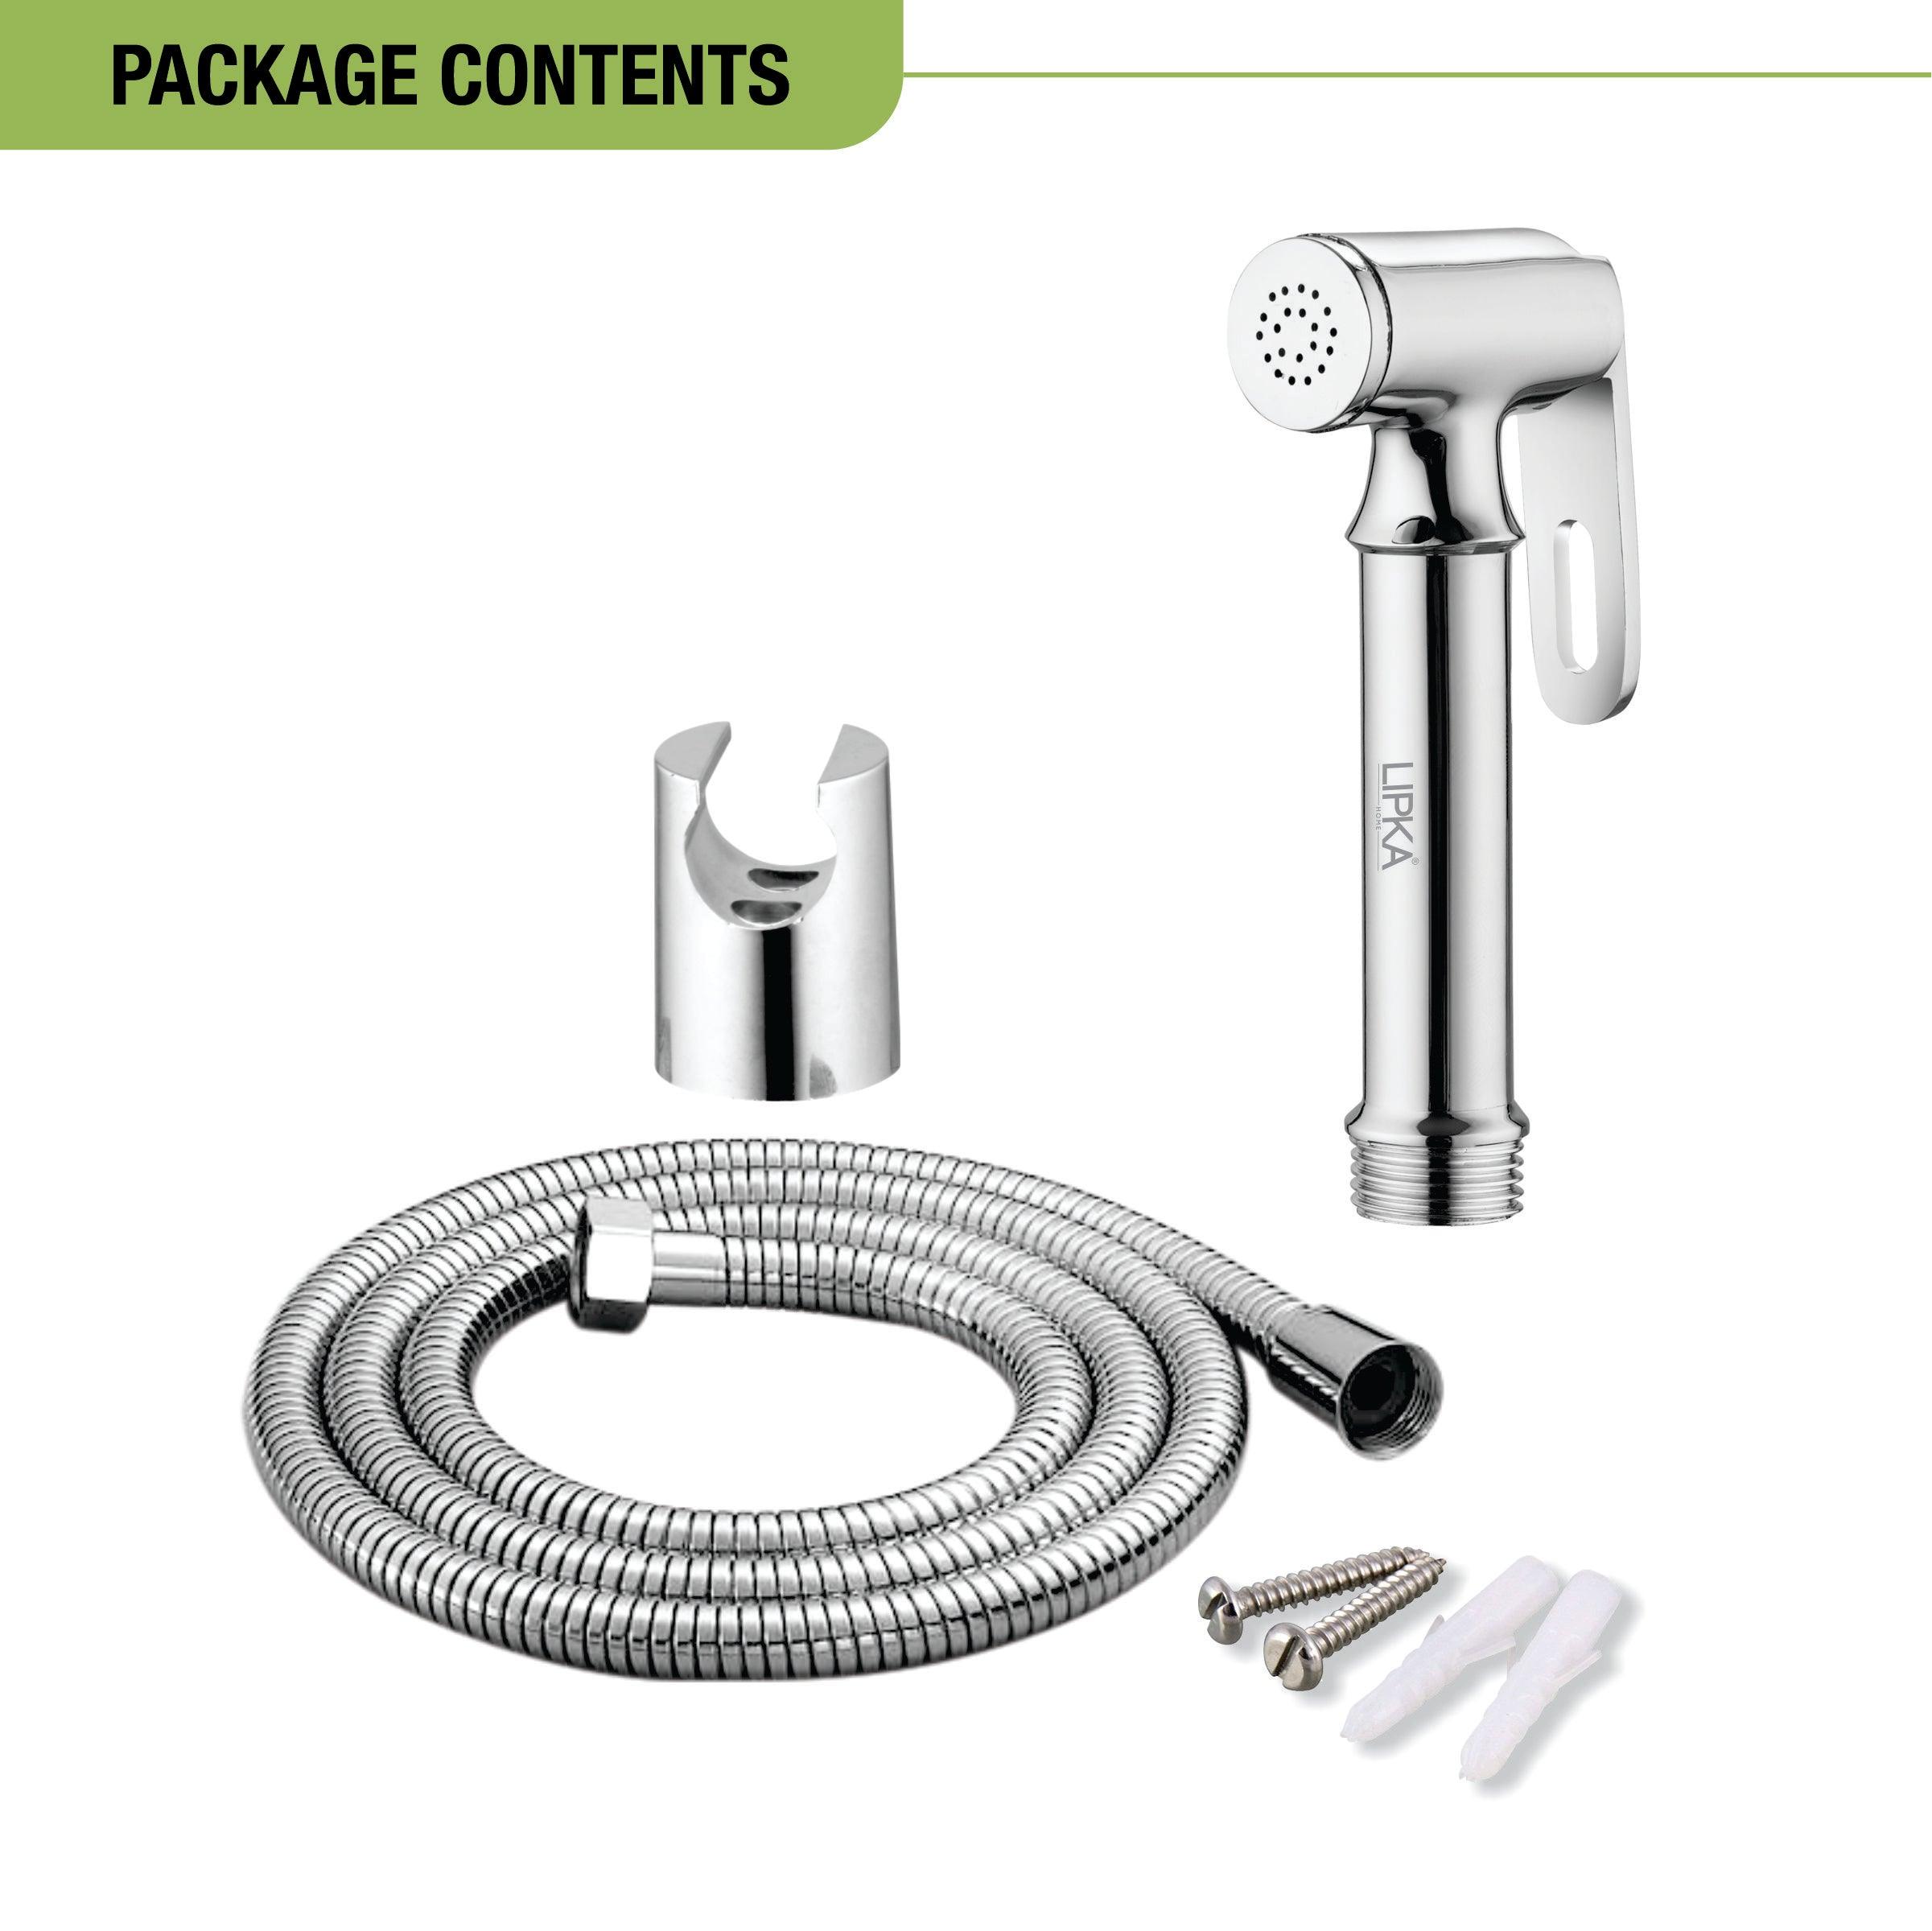 Sleek Brass Health Faucet (Complete Set) package contents